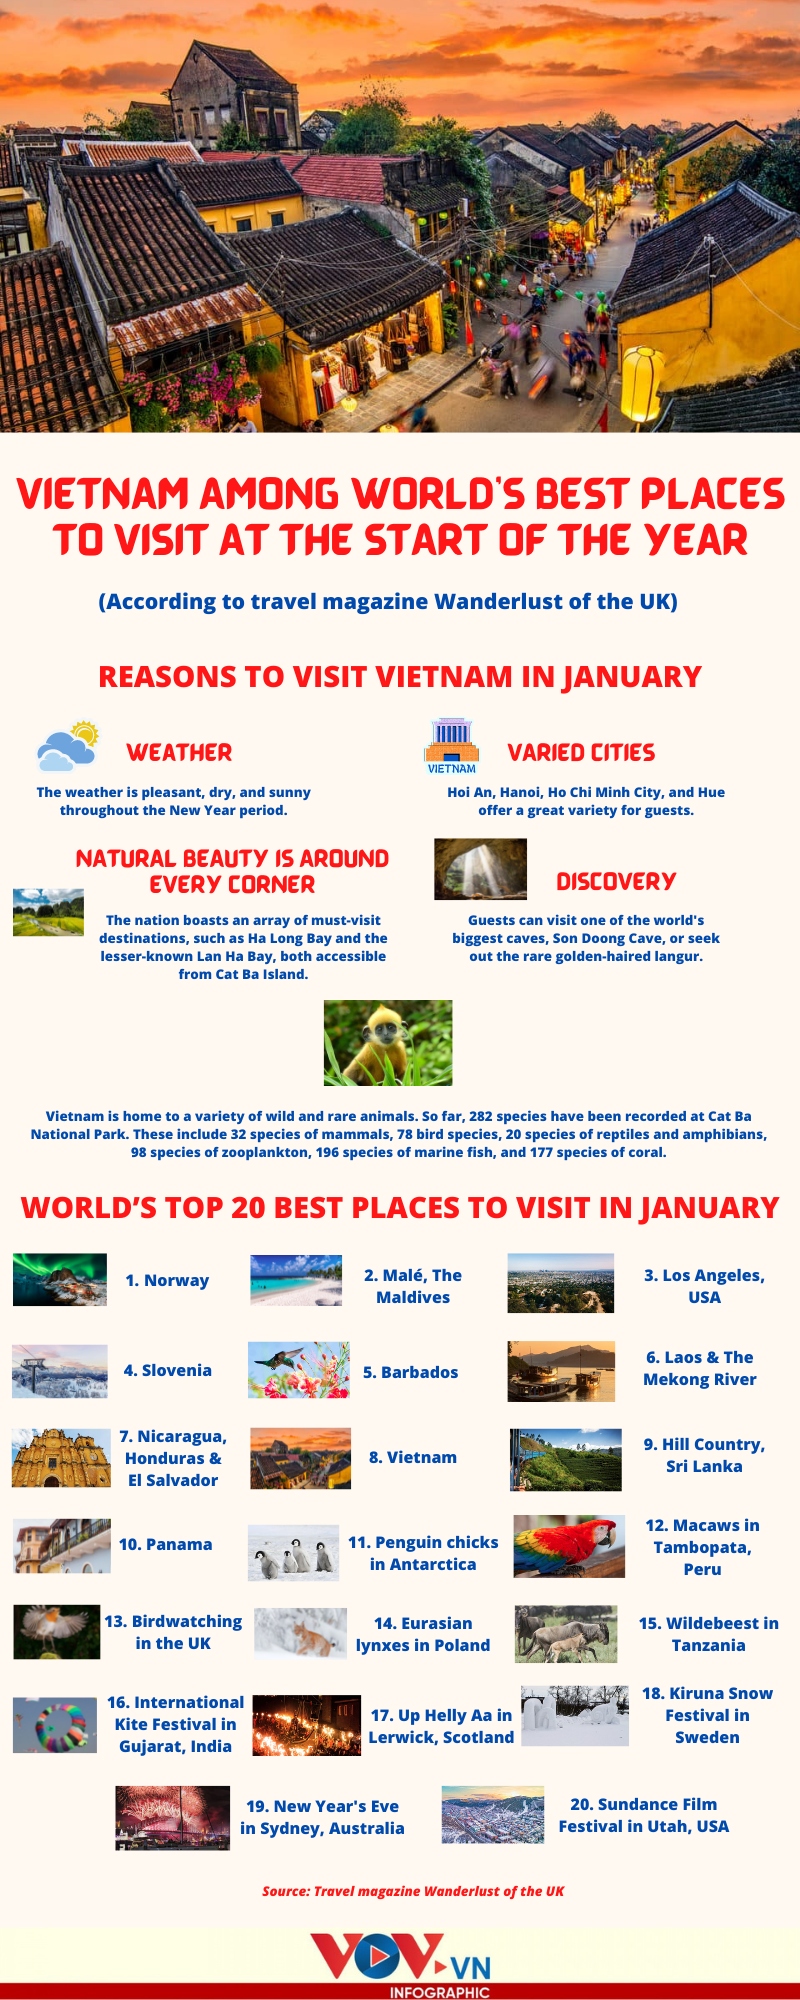 vietnam named among world s 20 best places to visit in january picture 1